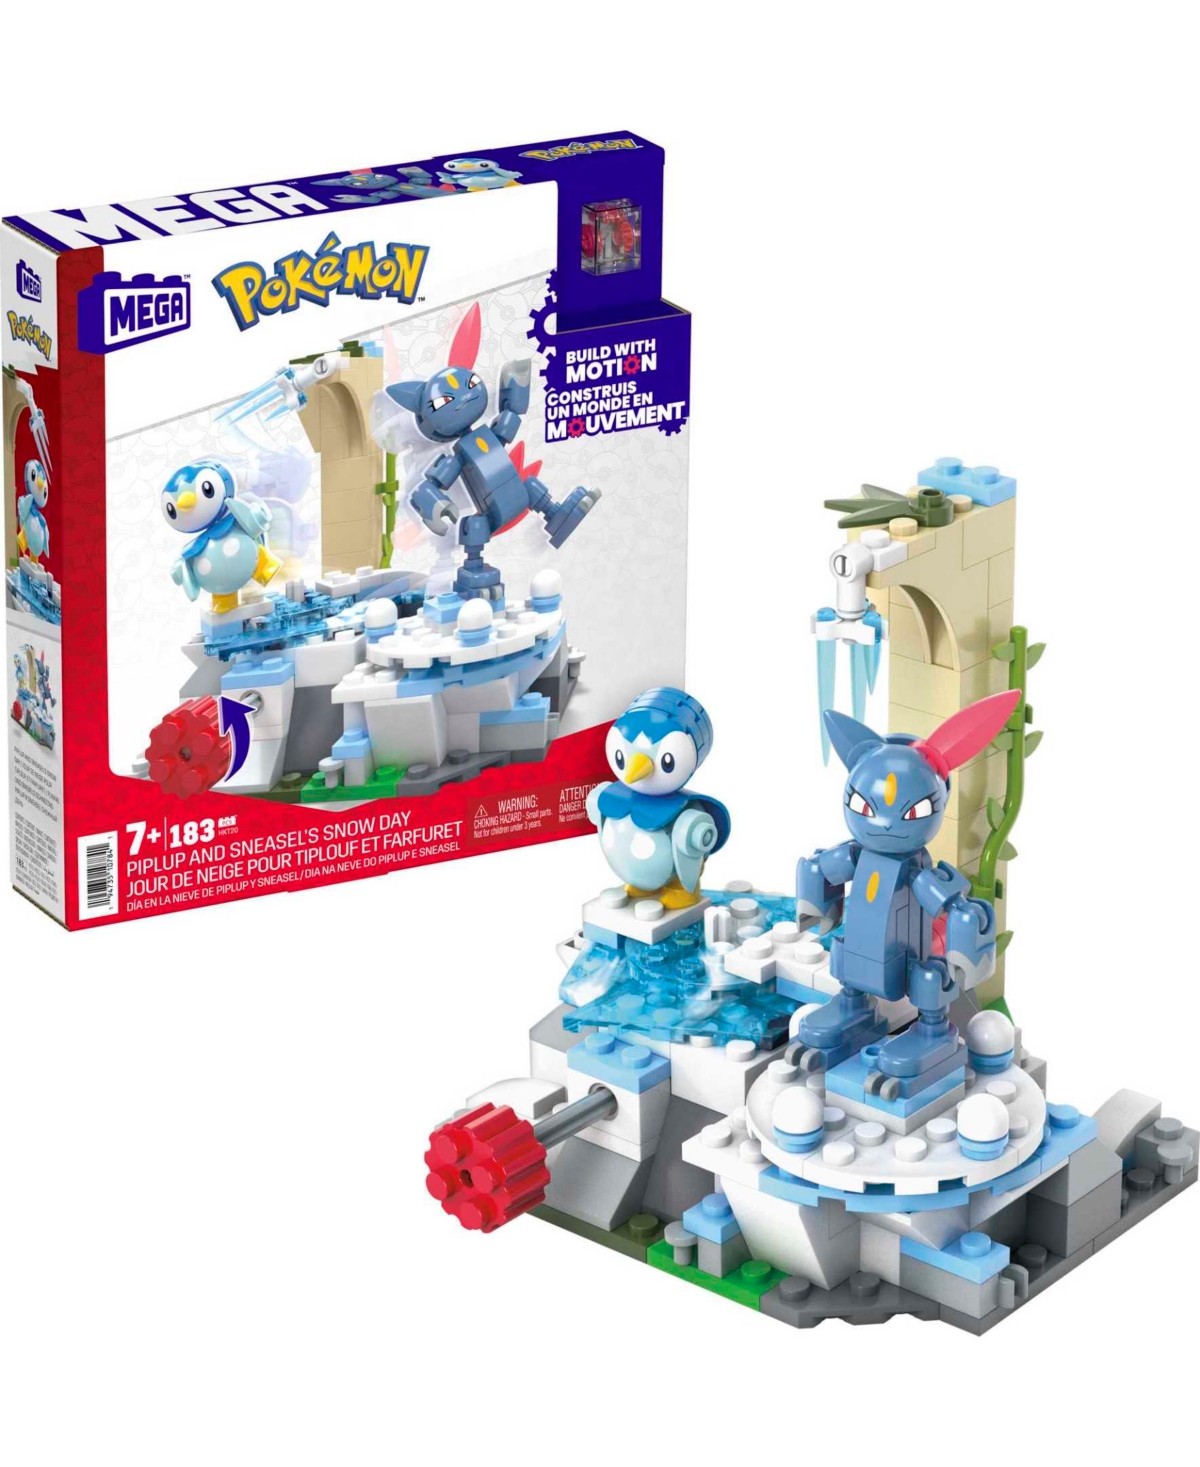 Mega Construx Pokemon Piplup And Sneasel's Snow Day Piece Building Set In Multi-color